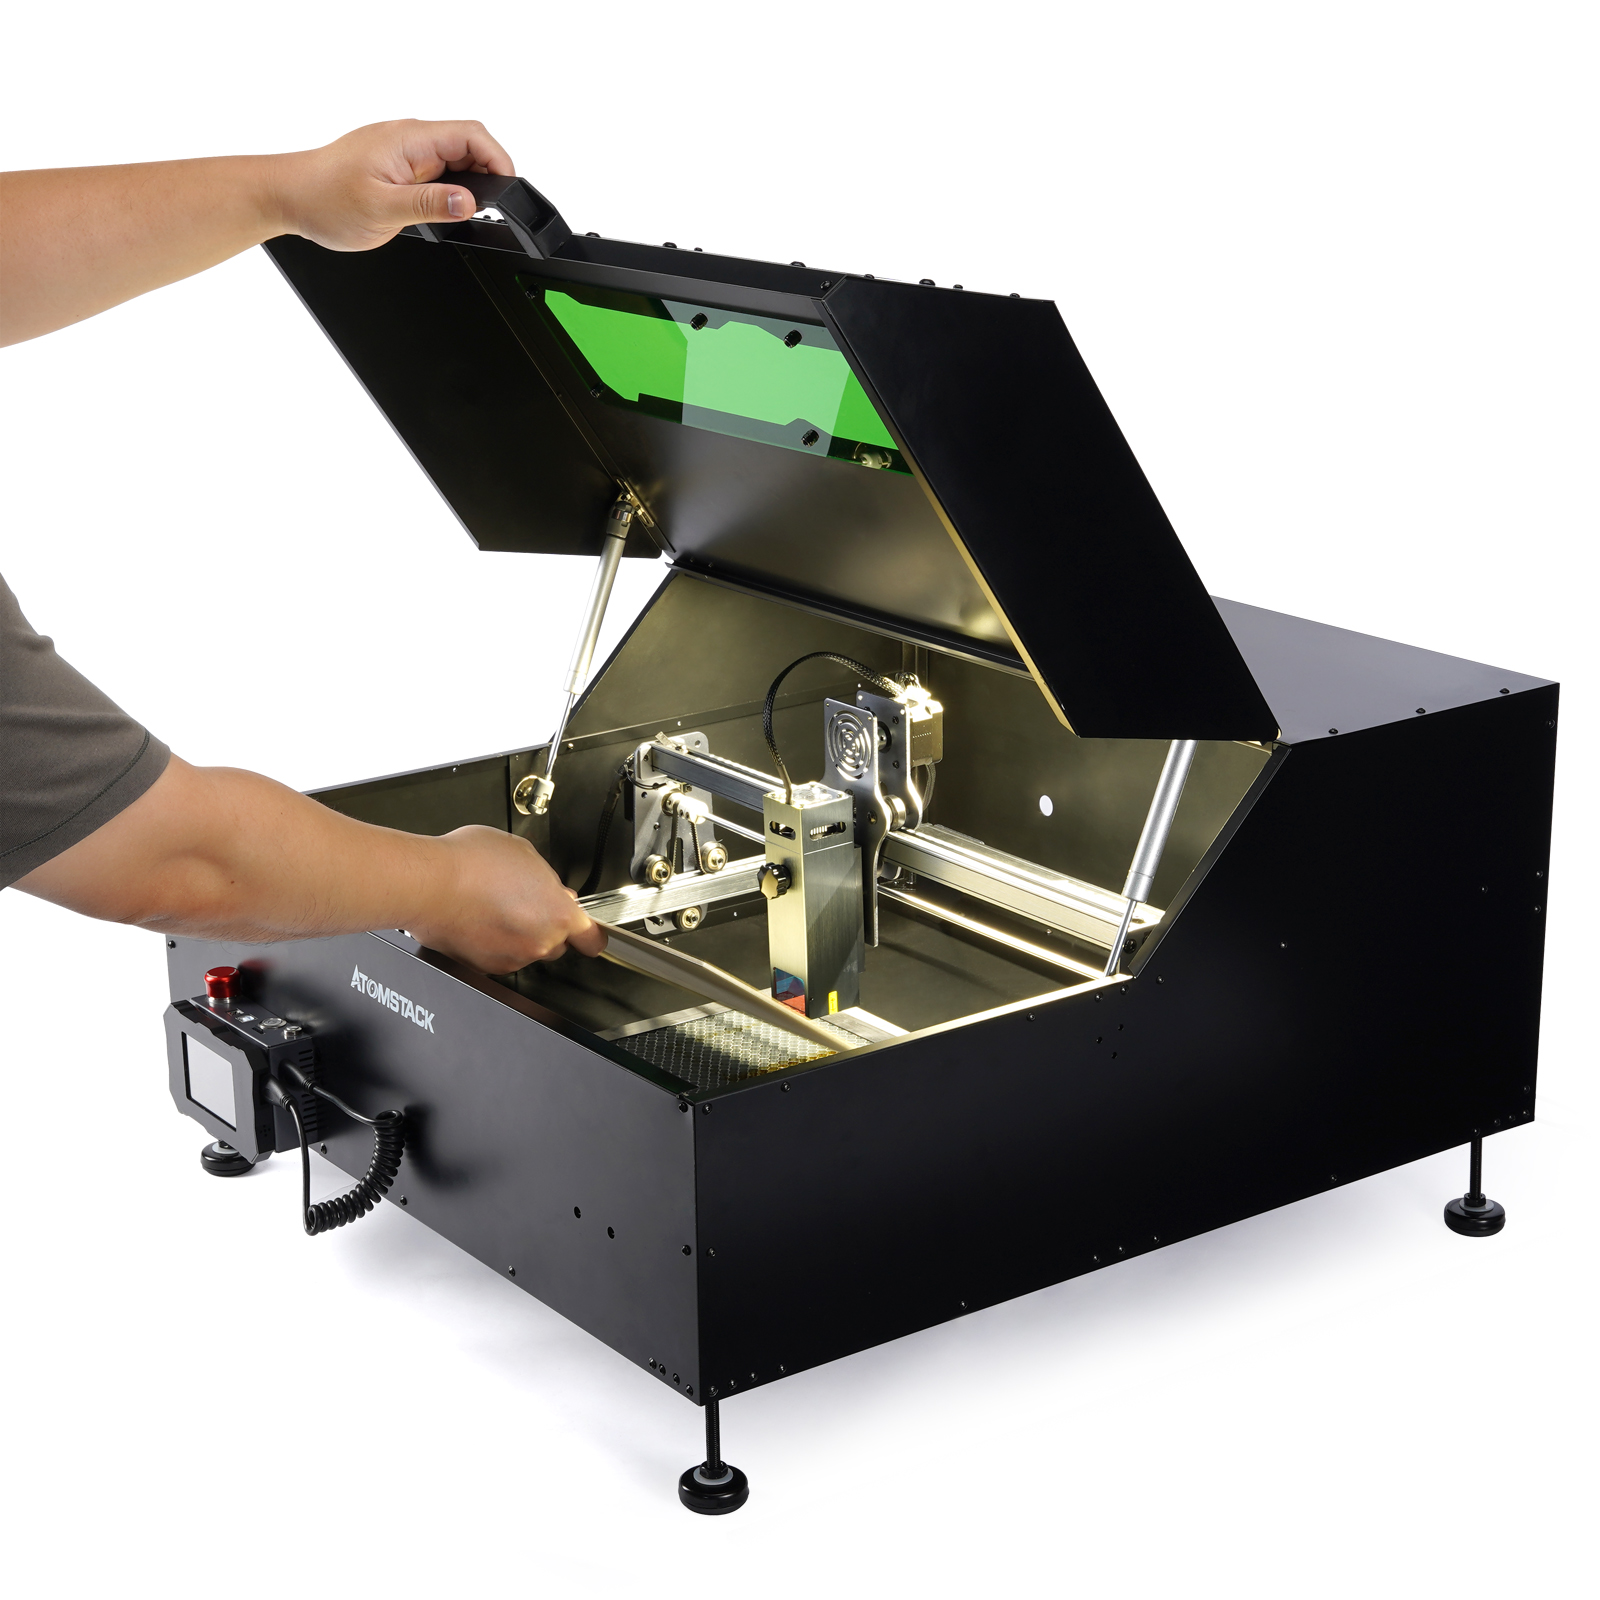 Find Atomstack B1 Enclosure Safe Dust Proof Cover for Laser Engraving Cutting Machine for Sale on Gipsybee.com with cryptocurrencies